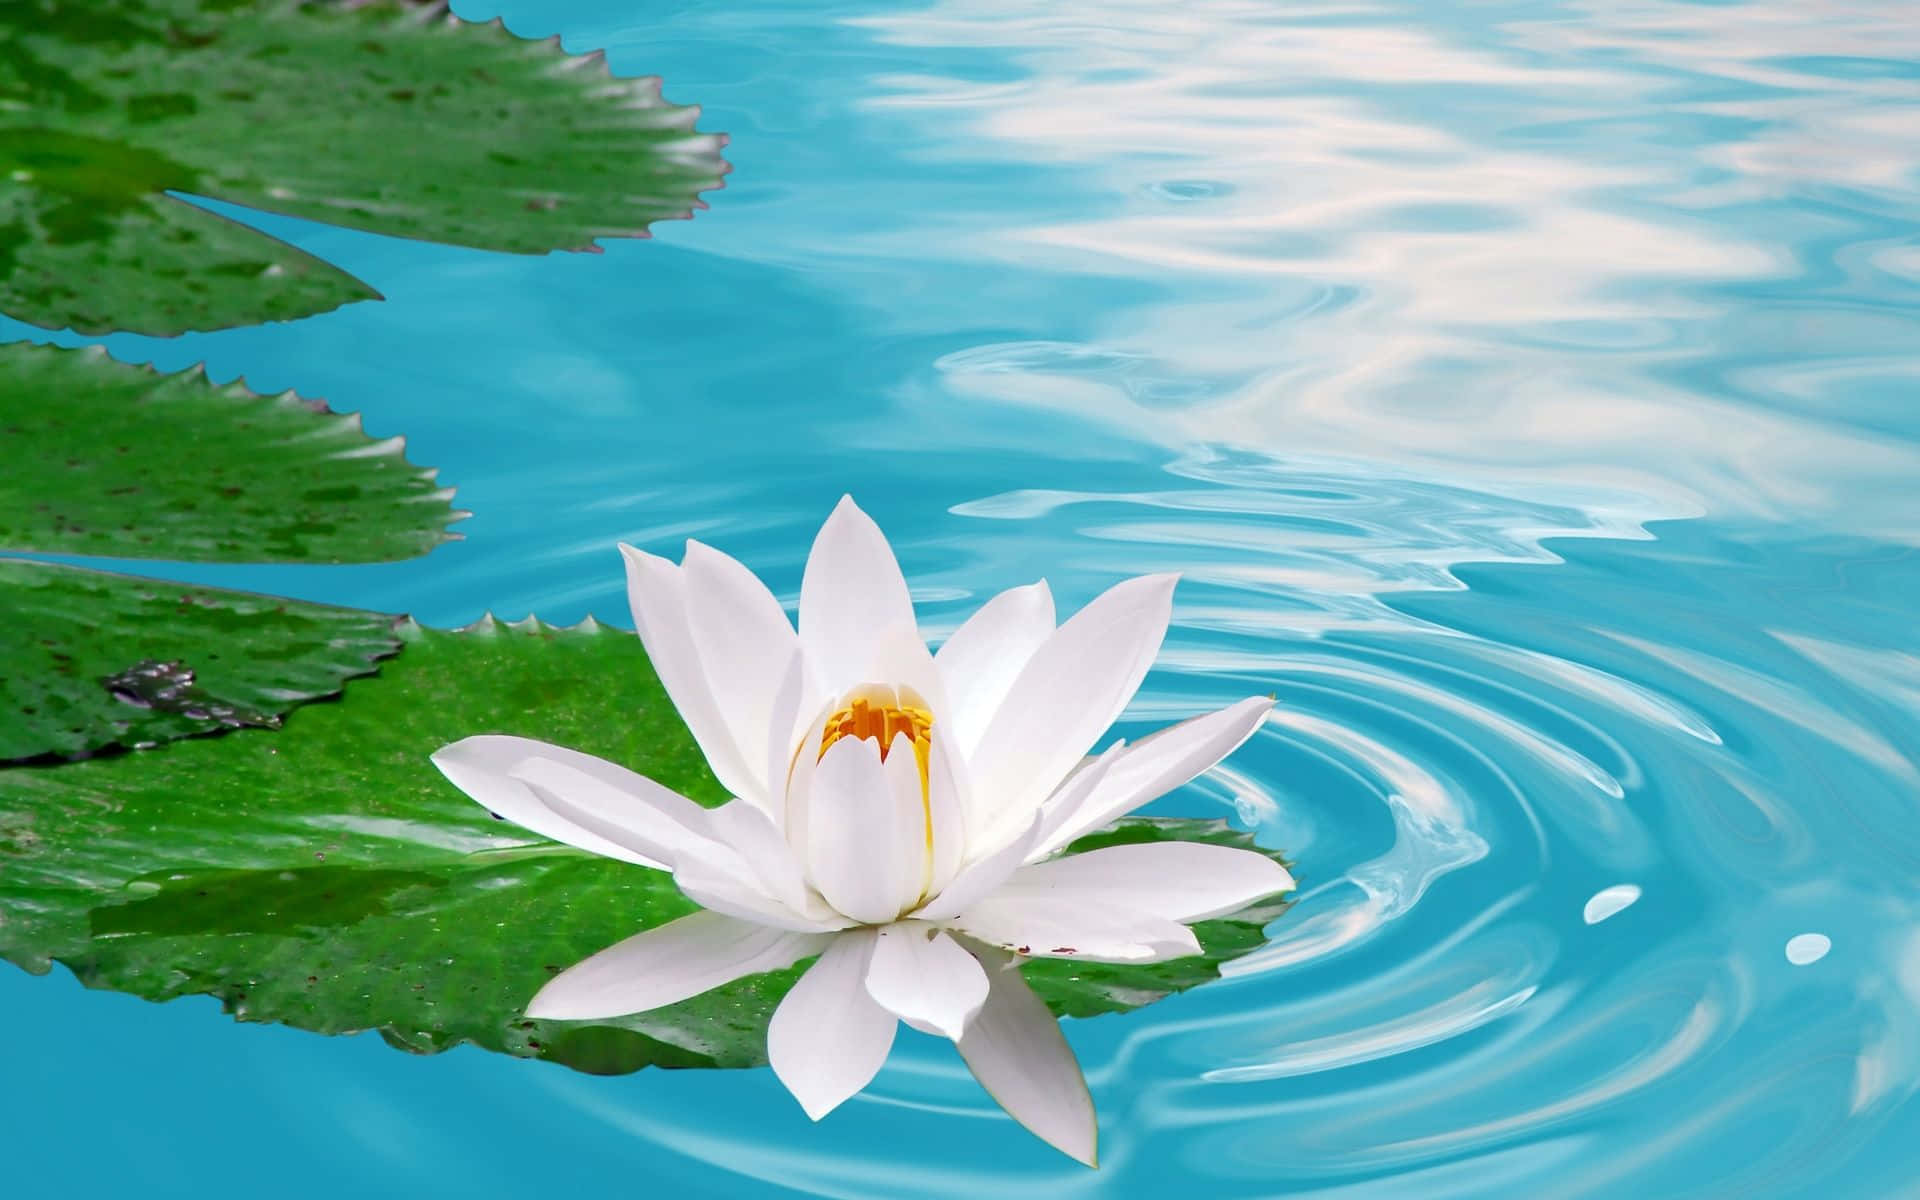 Let the beauty of the lotus, calm your mind and spirit.